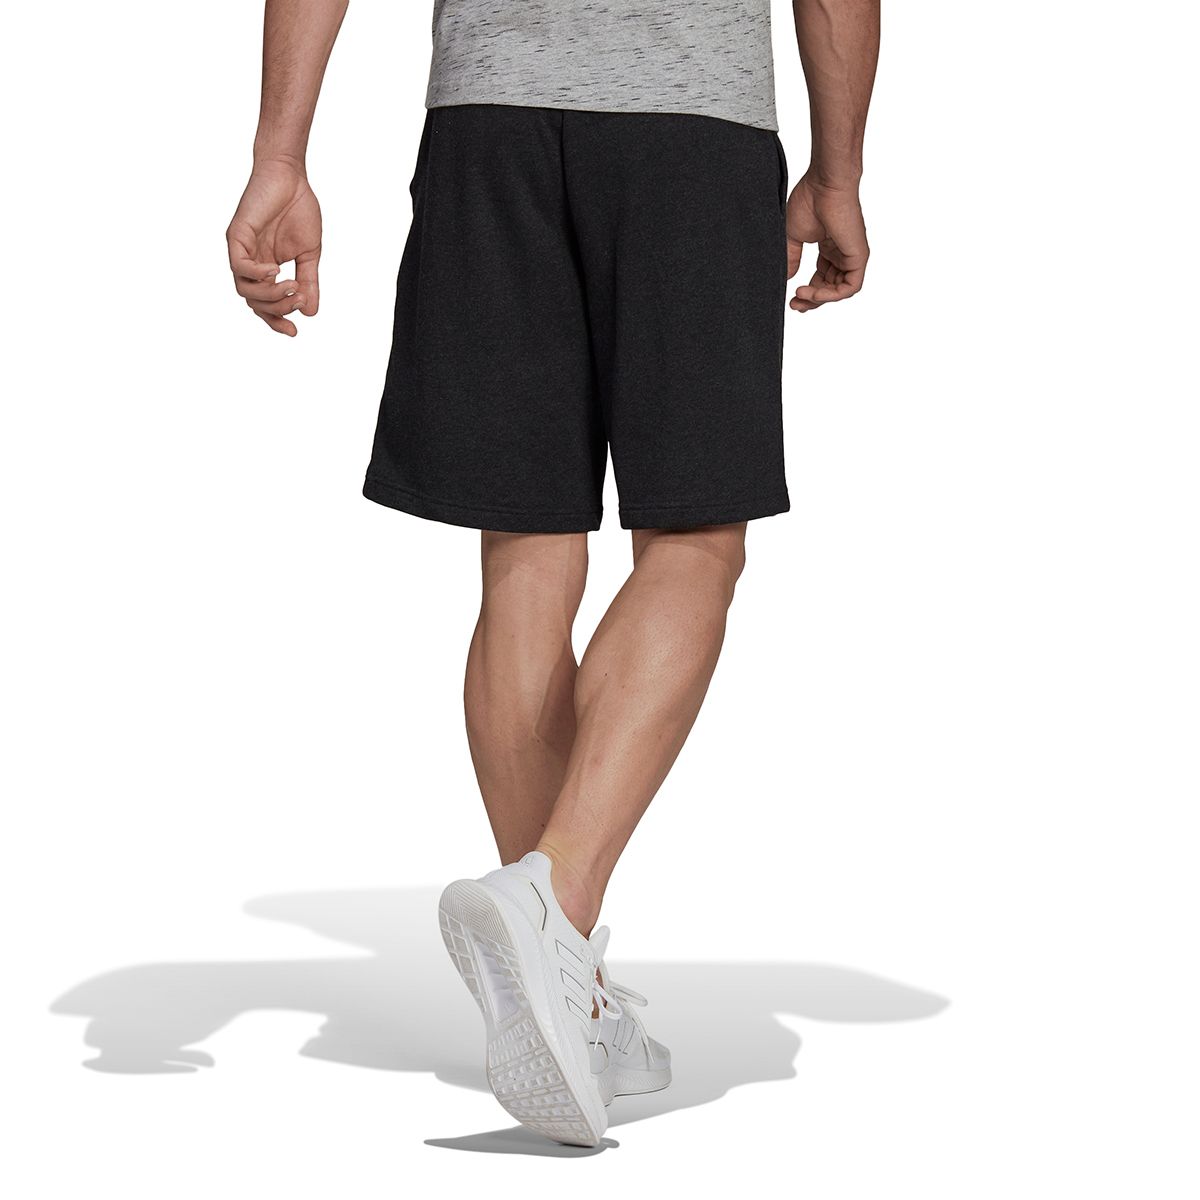 adidas Essentials French Terry Melange Men's Shorts HE1804